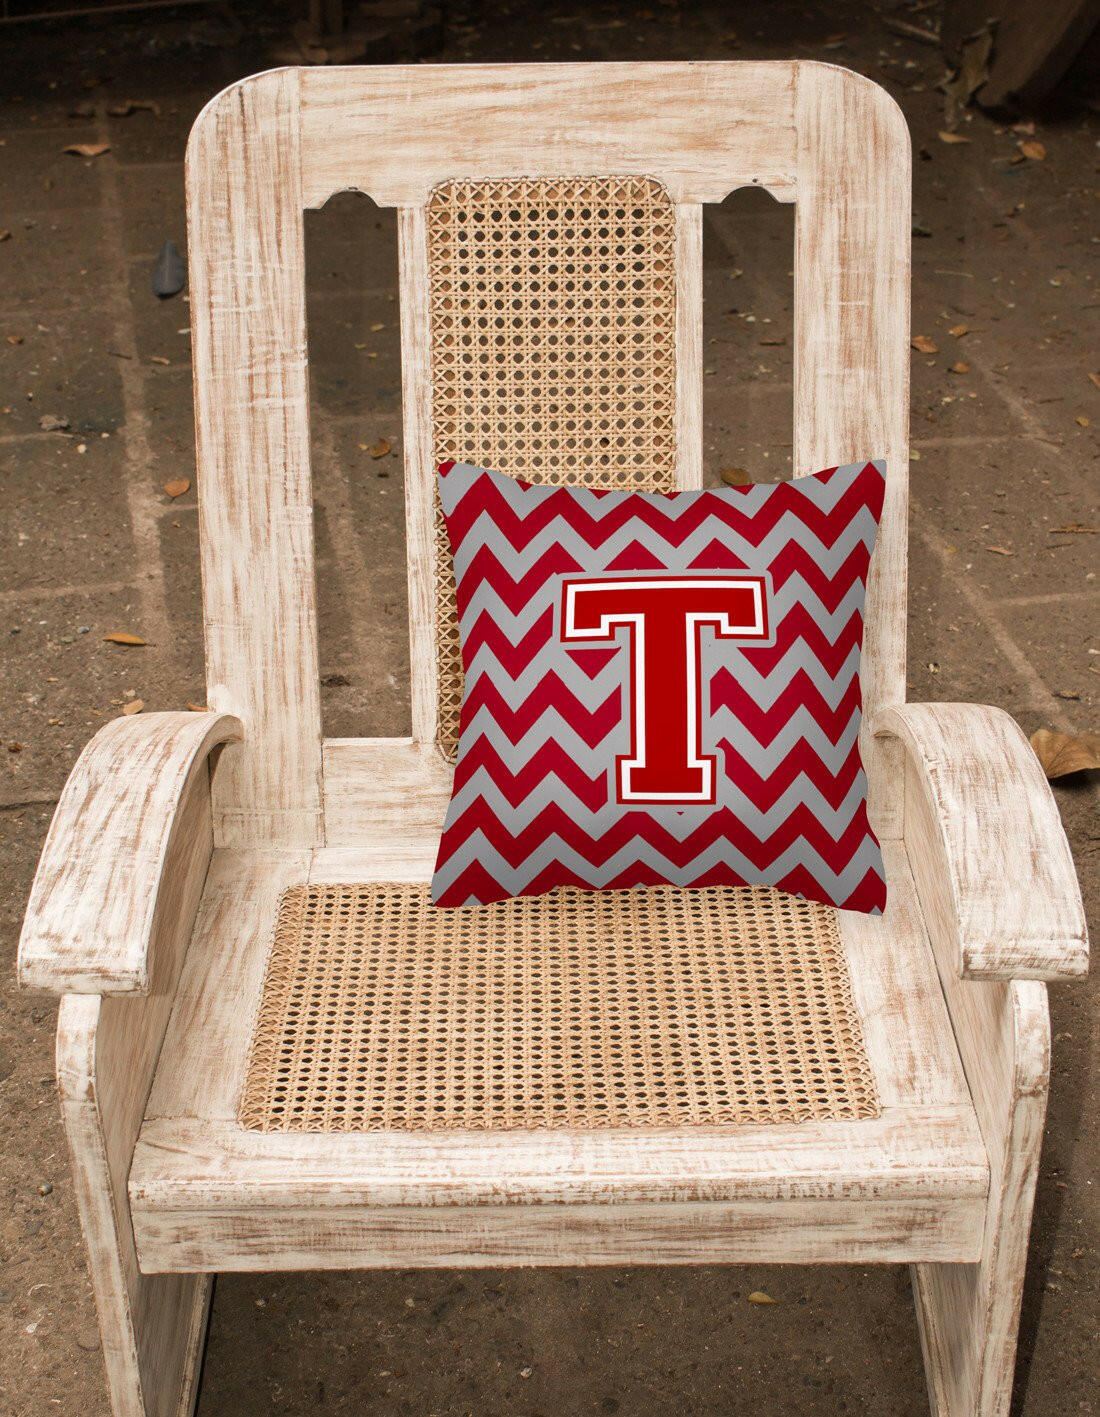 Letter T Chevron Maroon and White Fabric Decorative Pillow CJ1049-TPW1414 by Caroline's Treasures